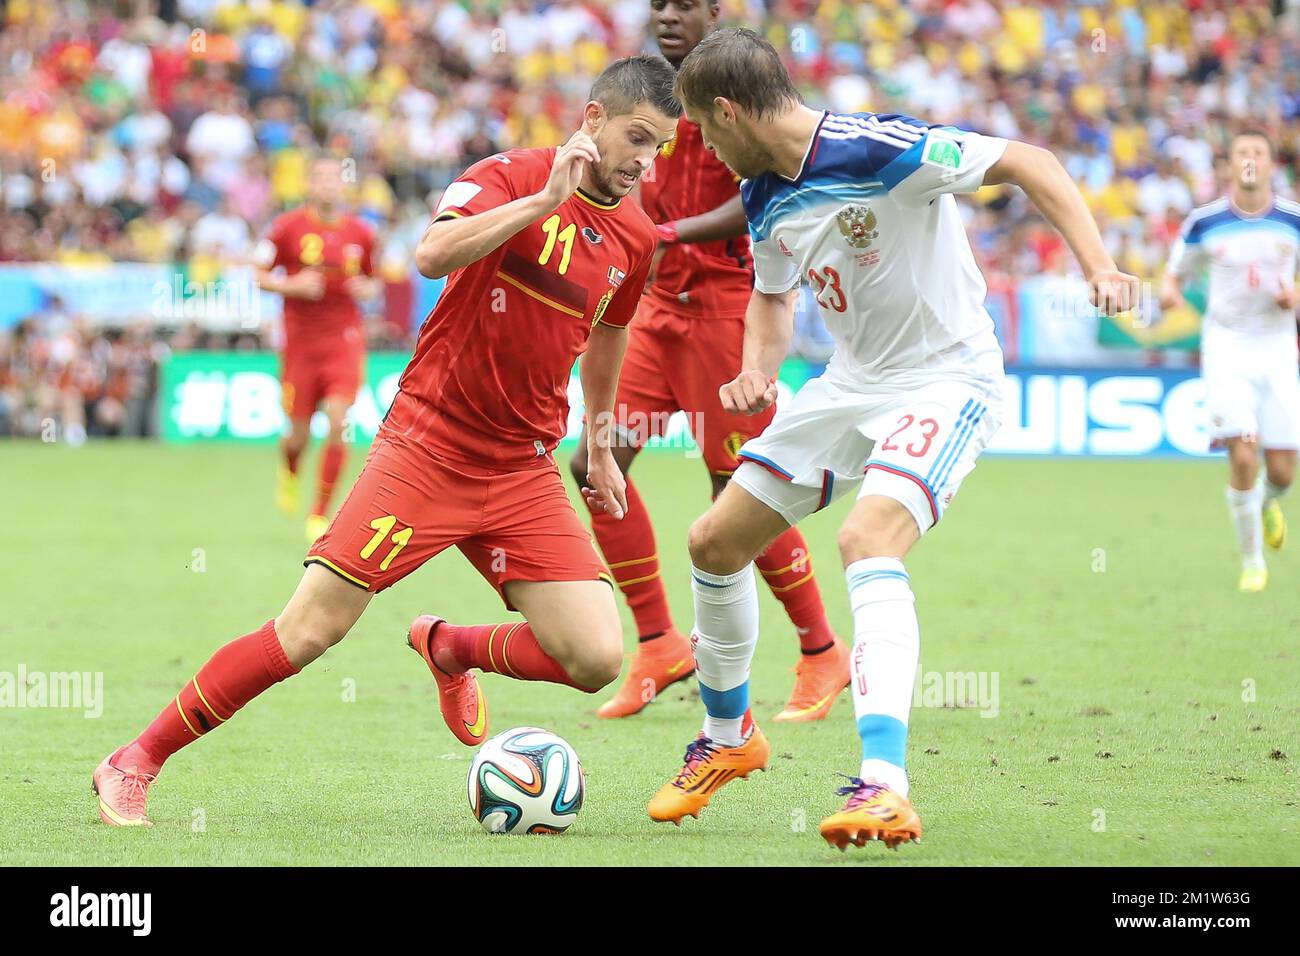 20140622 - RIO DE JANEIRO, BRAZIL: Belgium's Kevin Mirallas and Russia's Dmitry Kombarov in action at a soccer game between Belgian national team The Red Devils and Russia in Rio de Janeiro, Brazil, the second game in Group H of the first round of the 2014 FIFA World Cup, Sunday 22 June 2014. BELGA PHOTO BRUNO FAHY Stock Photo